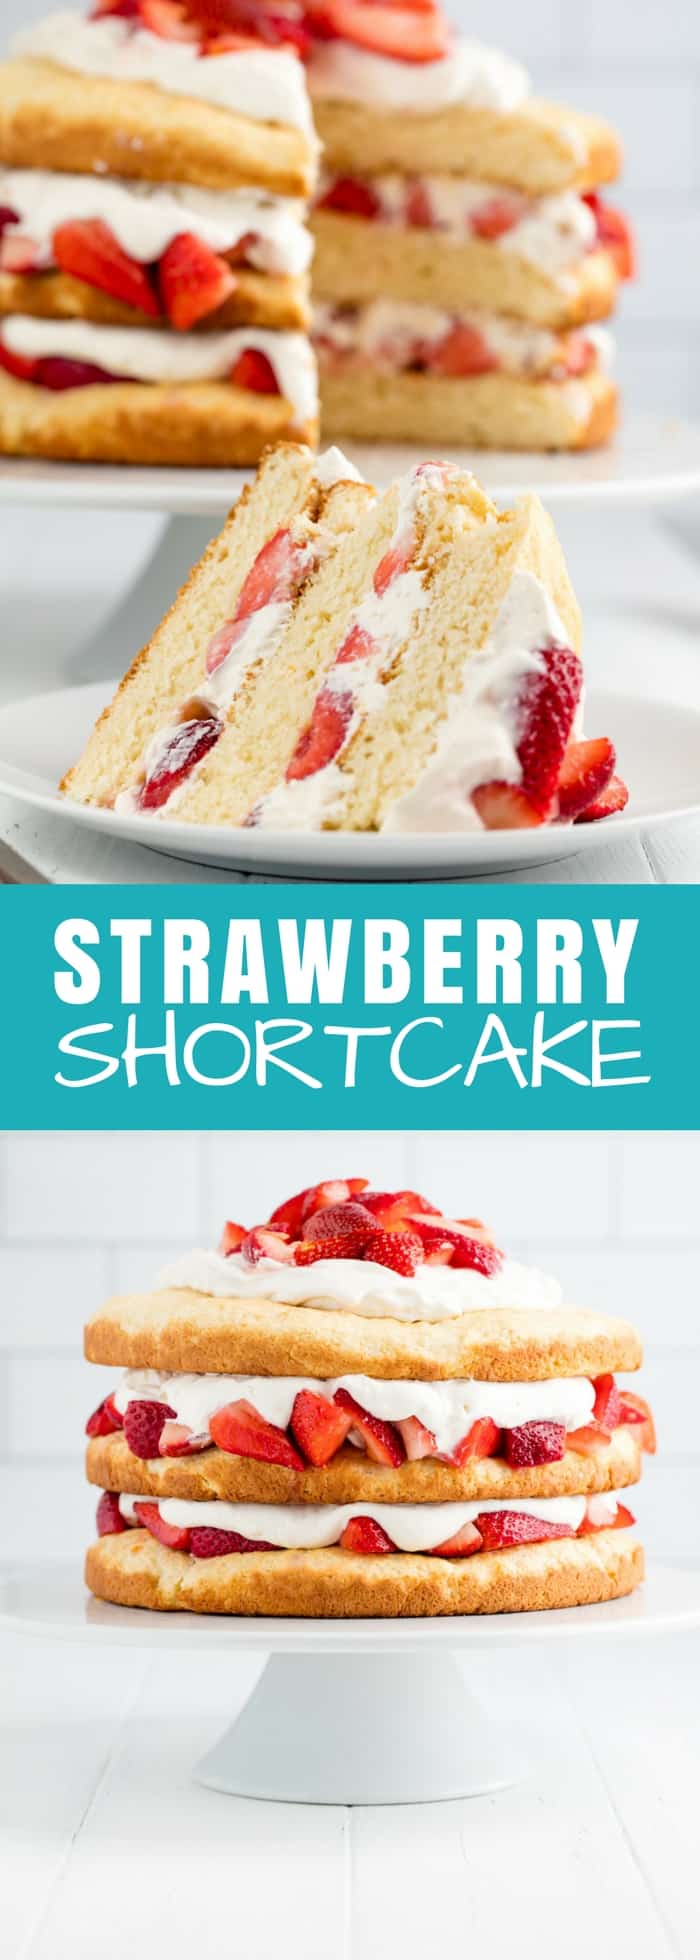 Strawberry Shortcake is a classic dessert that is perfect for spring and summer. This three layer strawberry dessert is not only beautiful, it's also delicious!